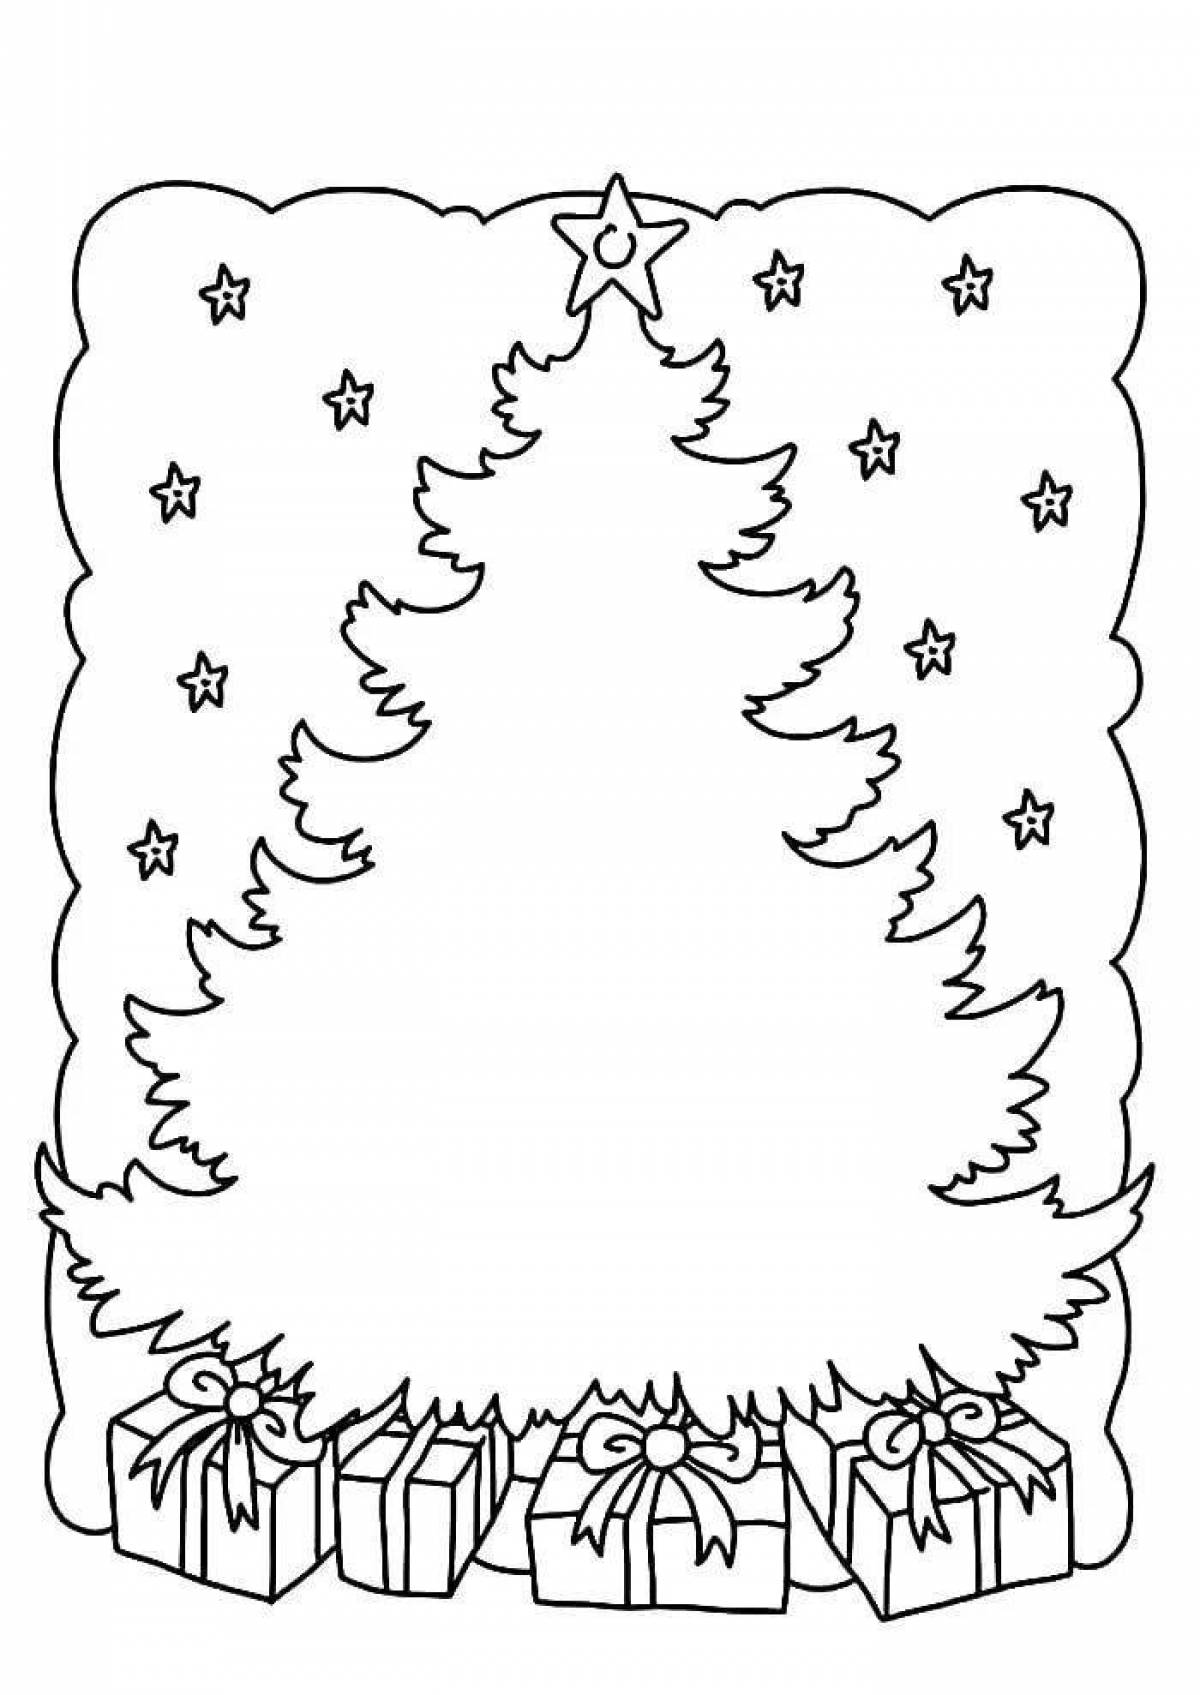 Awesome Christmas coloring frame